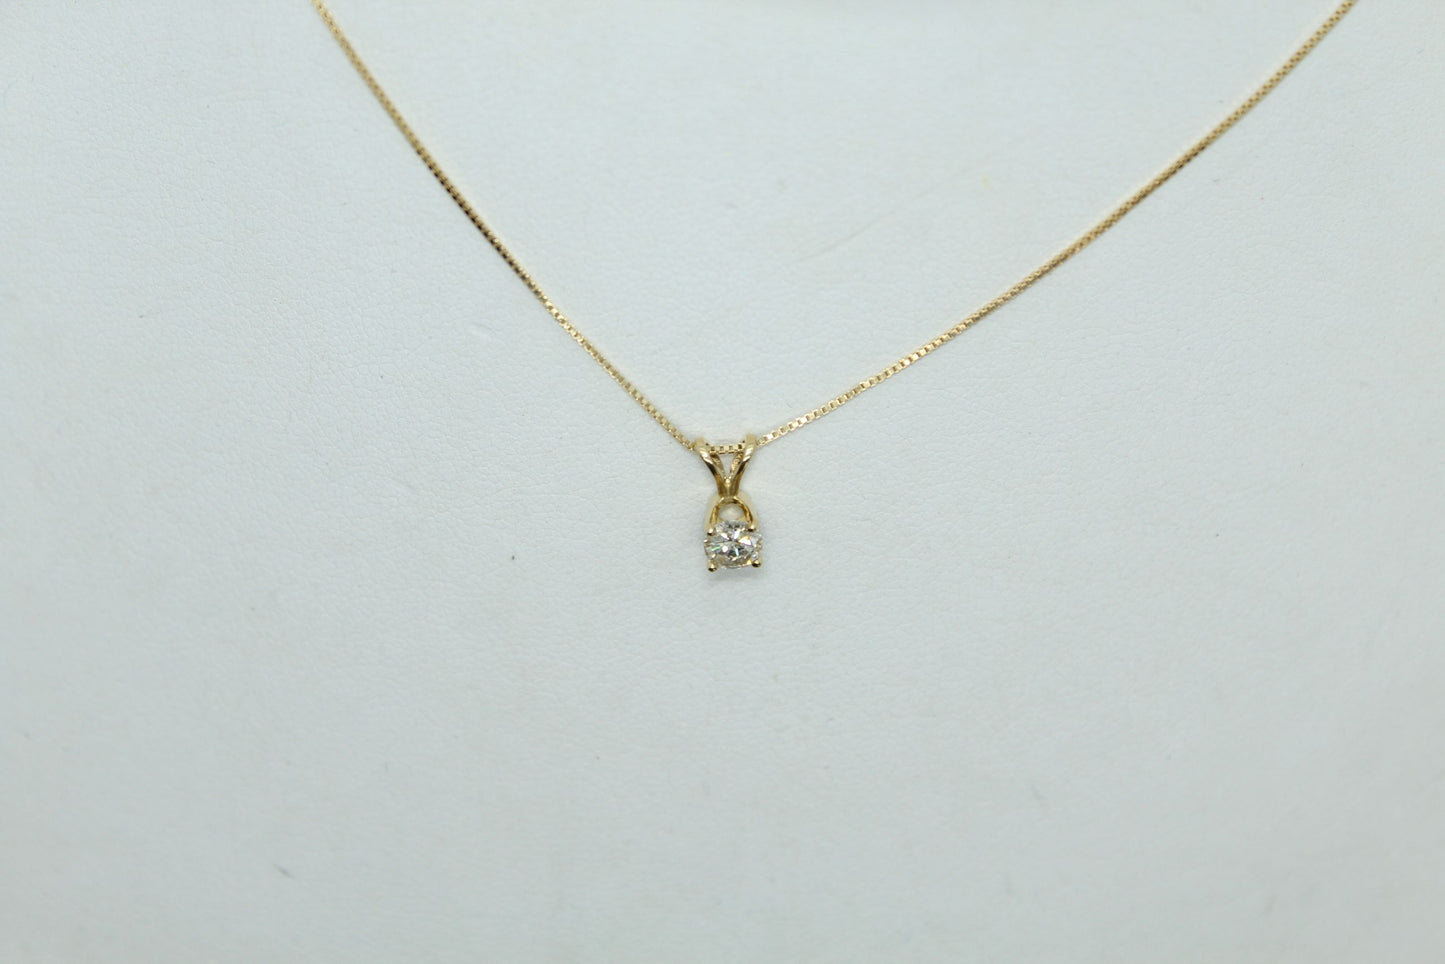 Solitaire diamond necklace, .25ct, 14KY YG SOL. DIA